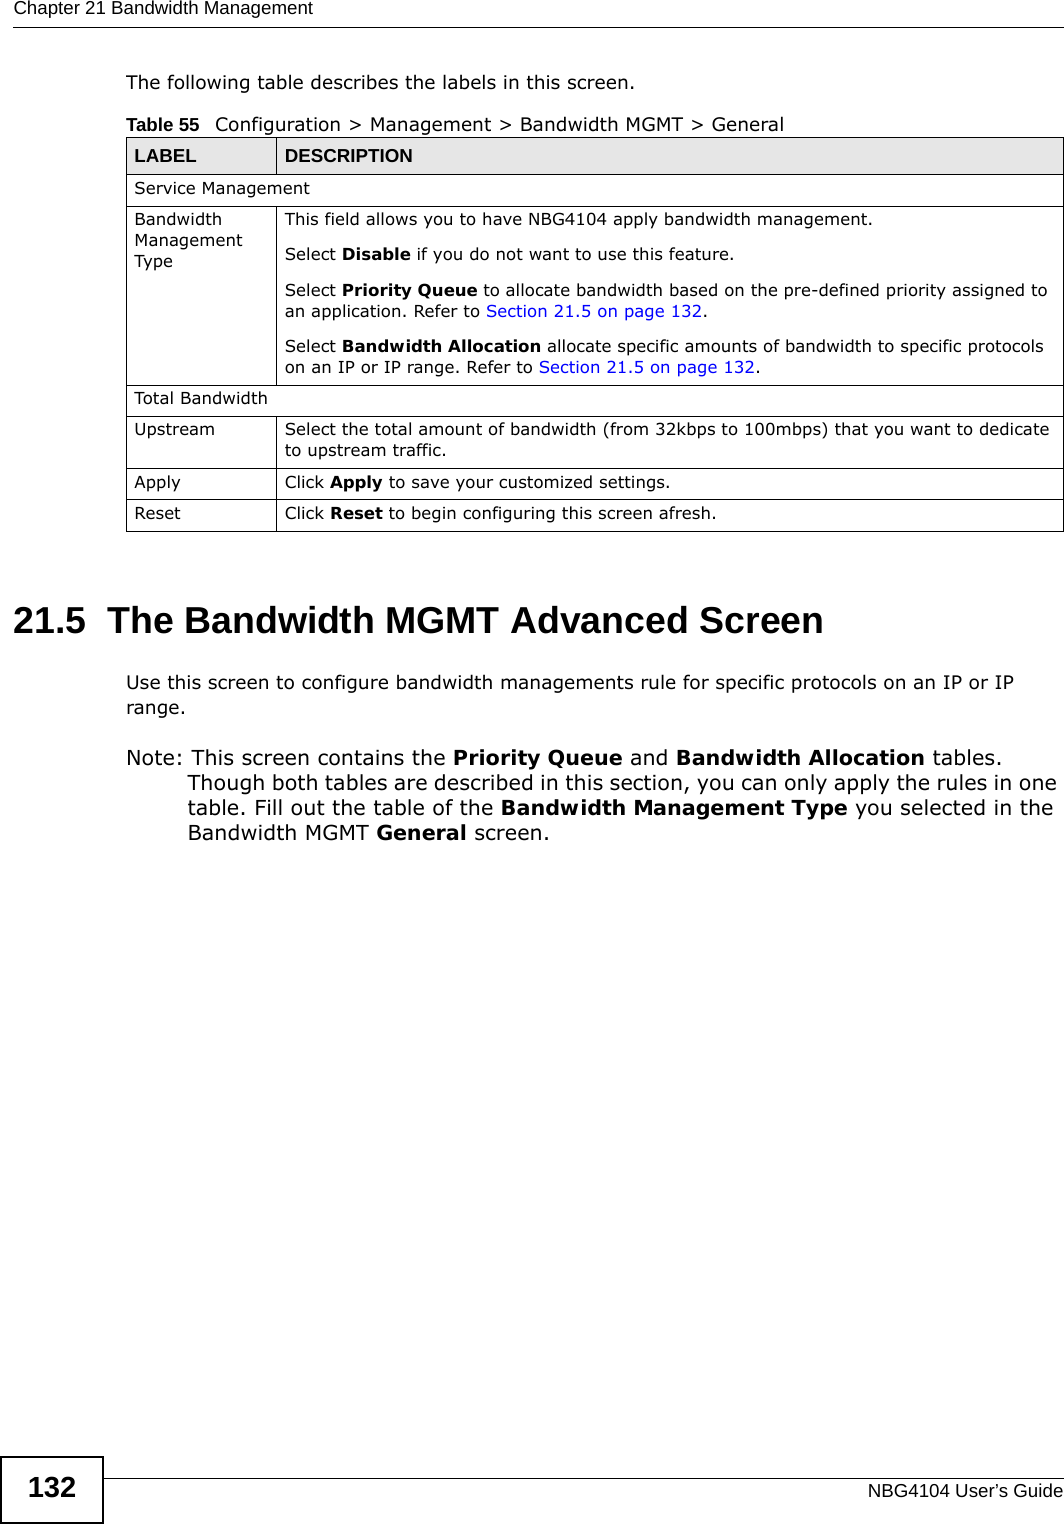 Chapter 21 Bandwidth ManagementNBG4104 User’s Guide132The following table describes the labels in this screen.21.5  The Bandwidth MGMT Advanced ScreenUse this screen to configure bandwidth managements rule for specific protocols on an IP or IP range. Note: This screen contains the Priority Queue and Bandwidth Allocation tables. Though both tables are described in this section, you can only apply the rules in one table. Fill out the table of the Bandwidth Management Type you selected in the Bandwidth MGMT General screen.Table 55   Configuration &gt; Management &gt; Bandwidth MGMT &gt; GeneralLABEL DESCRIPTIONService ManagementBandwidth Management TypeThis field allows you to have NBG4104 apply bandwidth management. Select Disable if you do not want to use this feature.Select Priority Queue to allocate bandwidth based on the pre-defined priority assigned to an application. Refer to Section 21.5 on page 132.Select Bandwidth Allocation allocate specific amounts of bandwidth to specific protocols on an IP or IP range. Refer to Section 21.5 on page 132.Total Bandwidth Upstream Select the total amount of bandwidth (from 32kbps to 100mbps) that you want to dedicate to upstream traffic. Apply Click Apply to save your customized settings.Reset Click Reset to begin configuring this screen afresh.